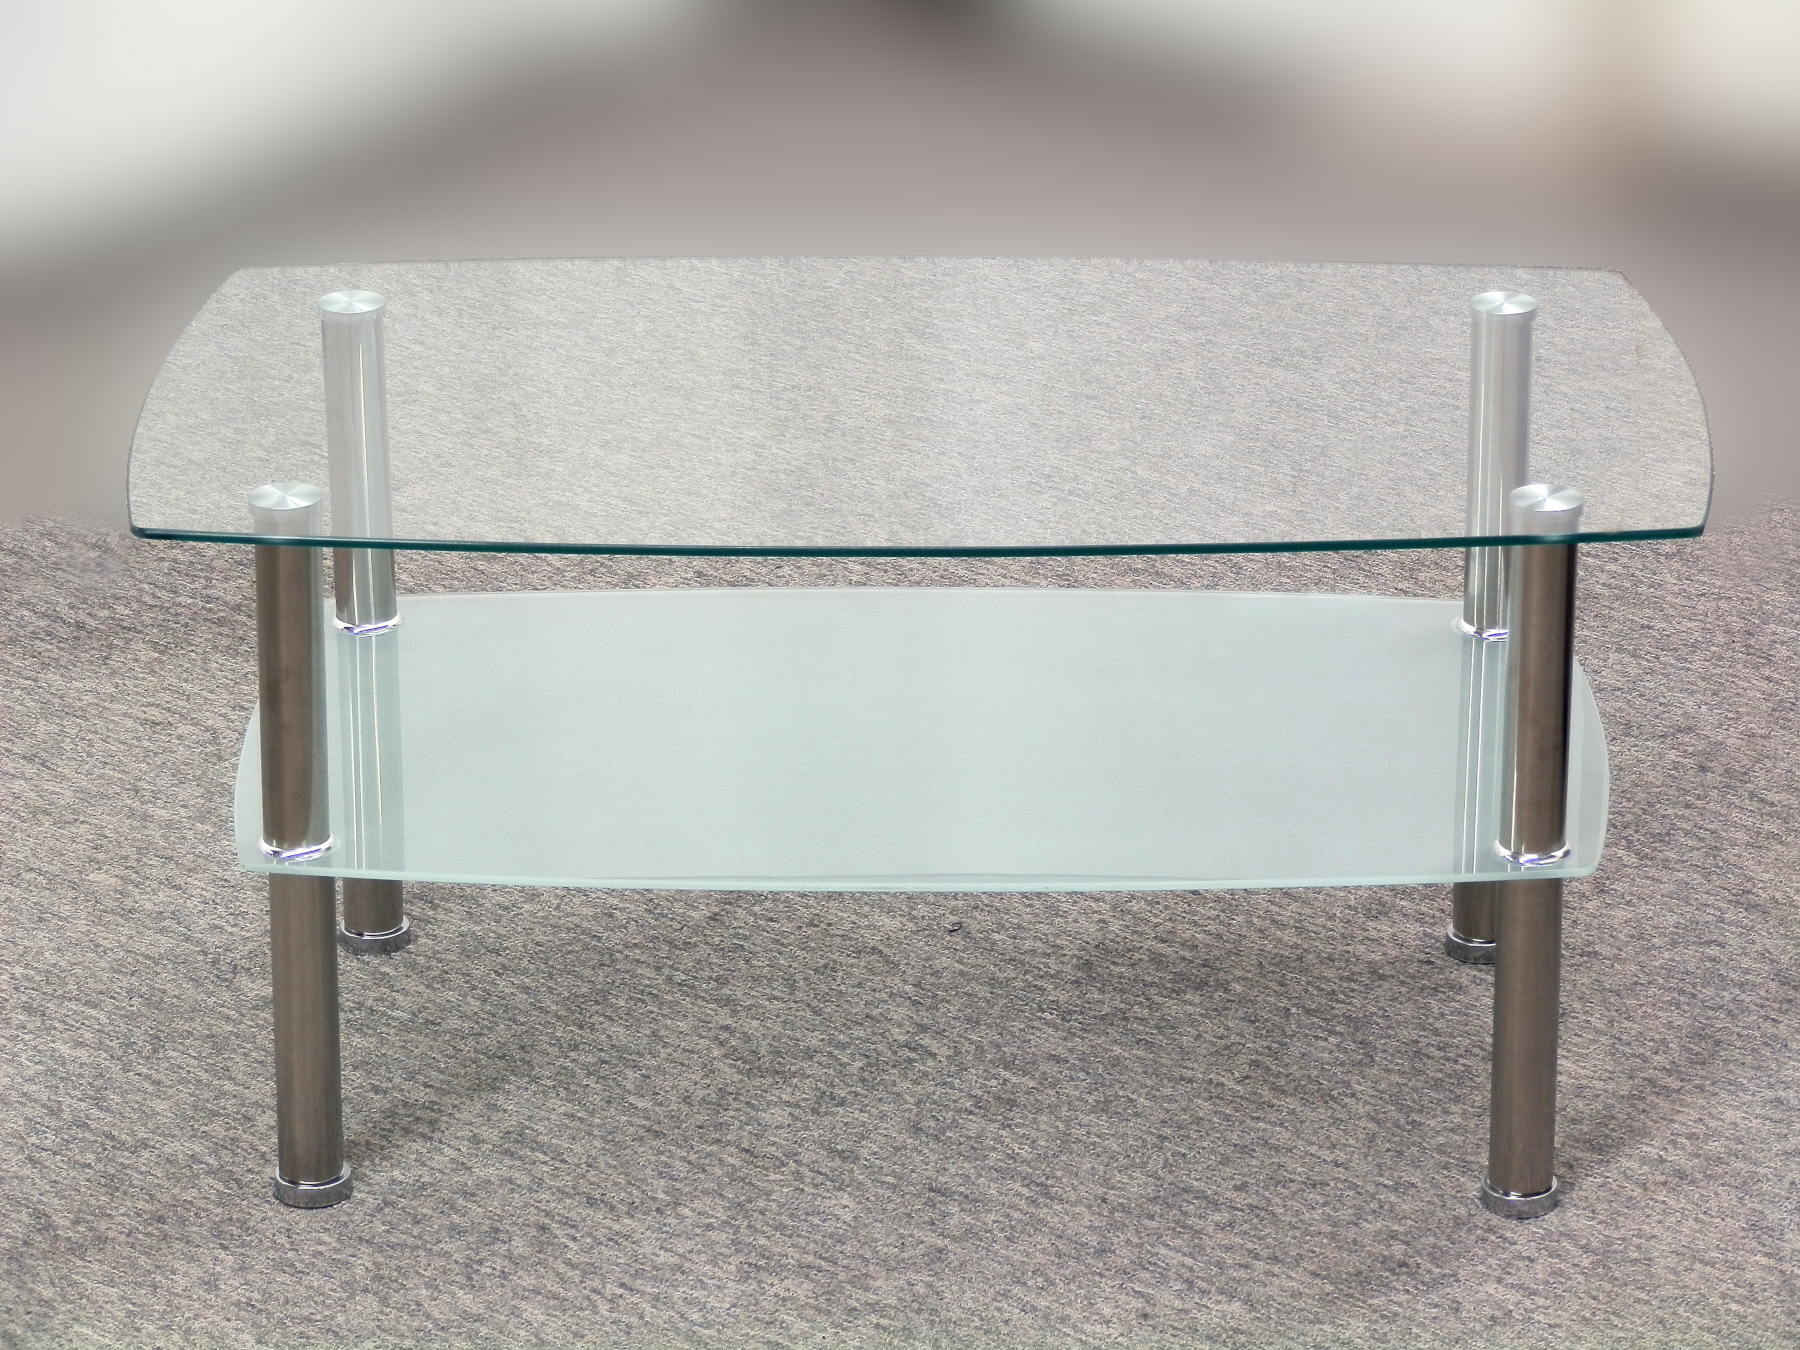 22987 - 22988 - TF-5610 - coffee - table - new